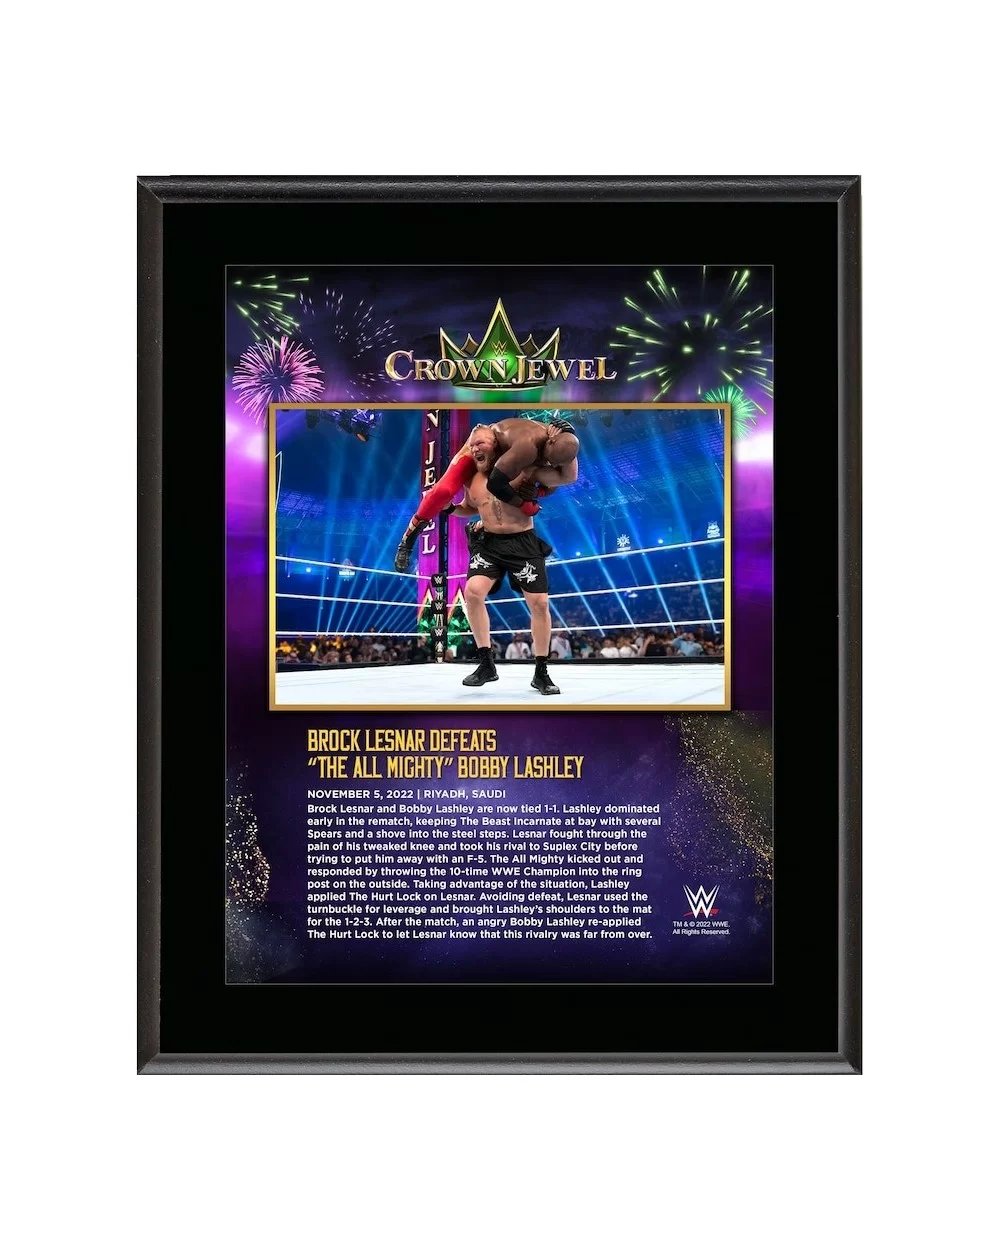 Brock Lesnar 10.5" x 13" 2022 Crown Jewel Sublimated Plaque $12.00 Home & Office